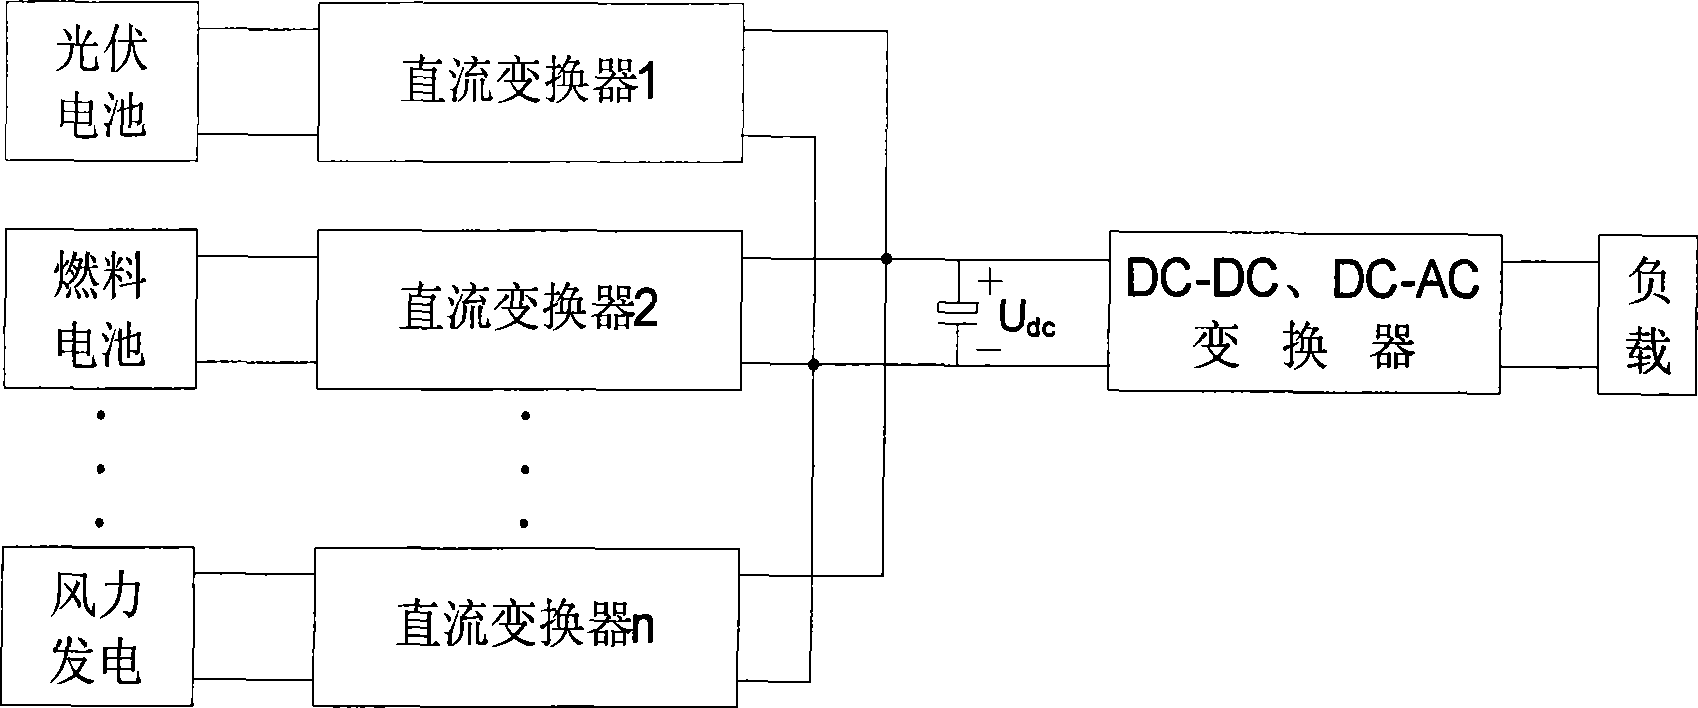 A double-isolation boosting multi-input direct current convertor